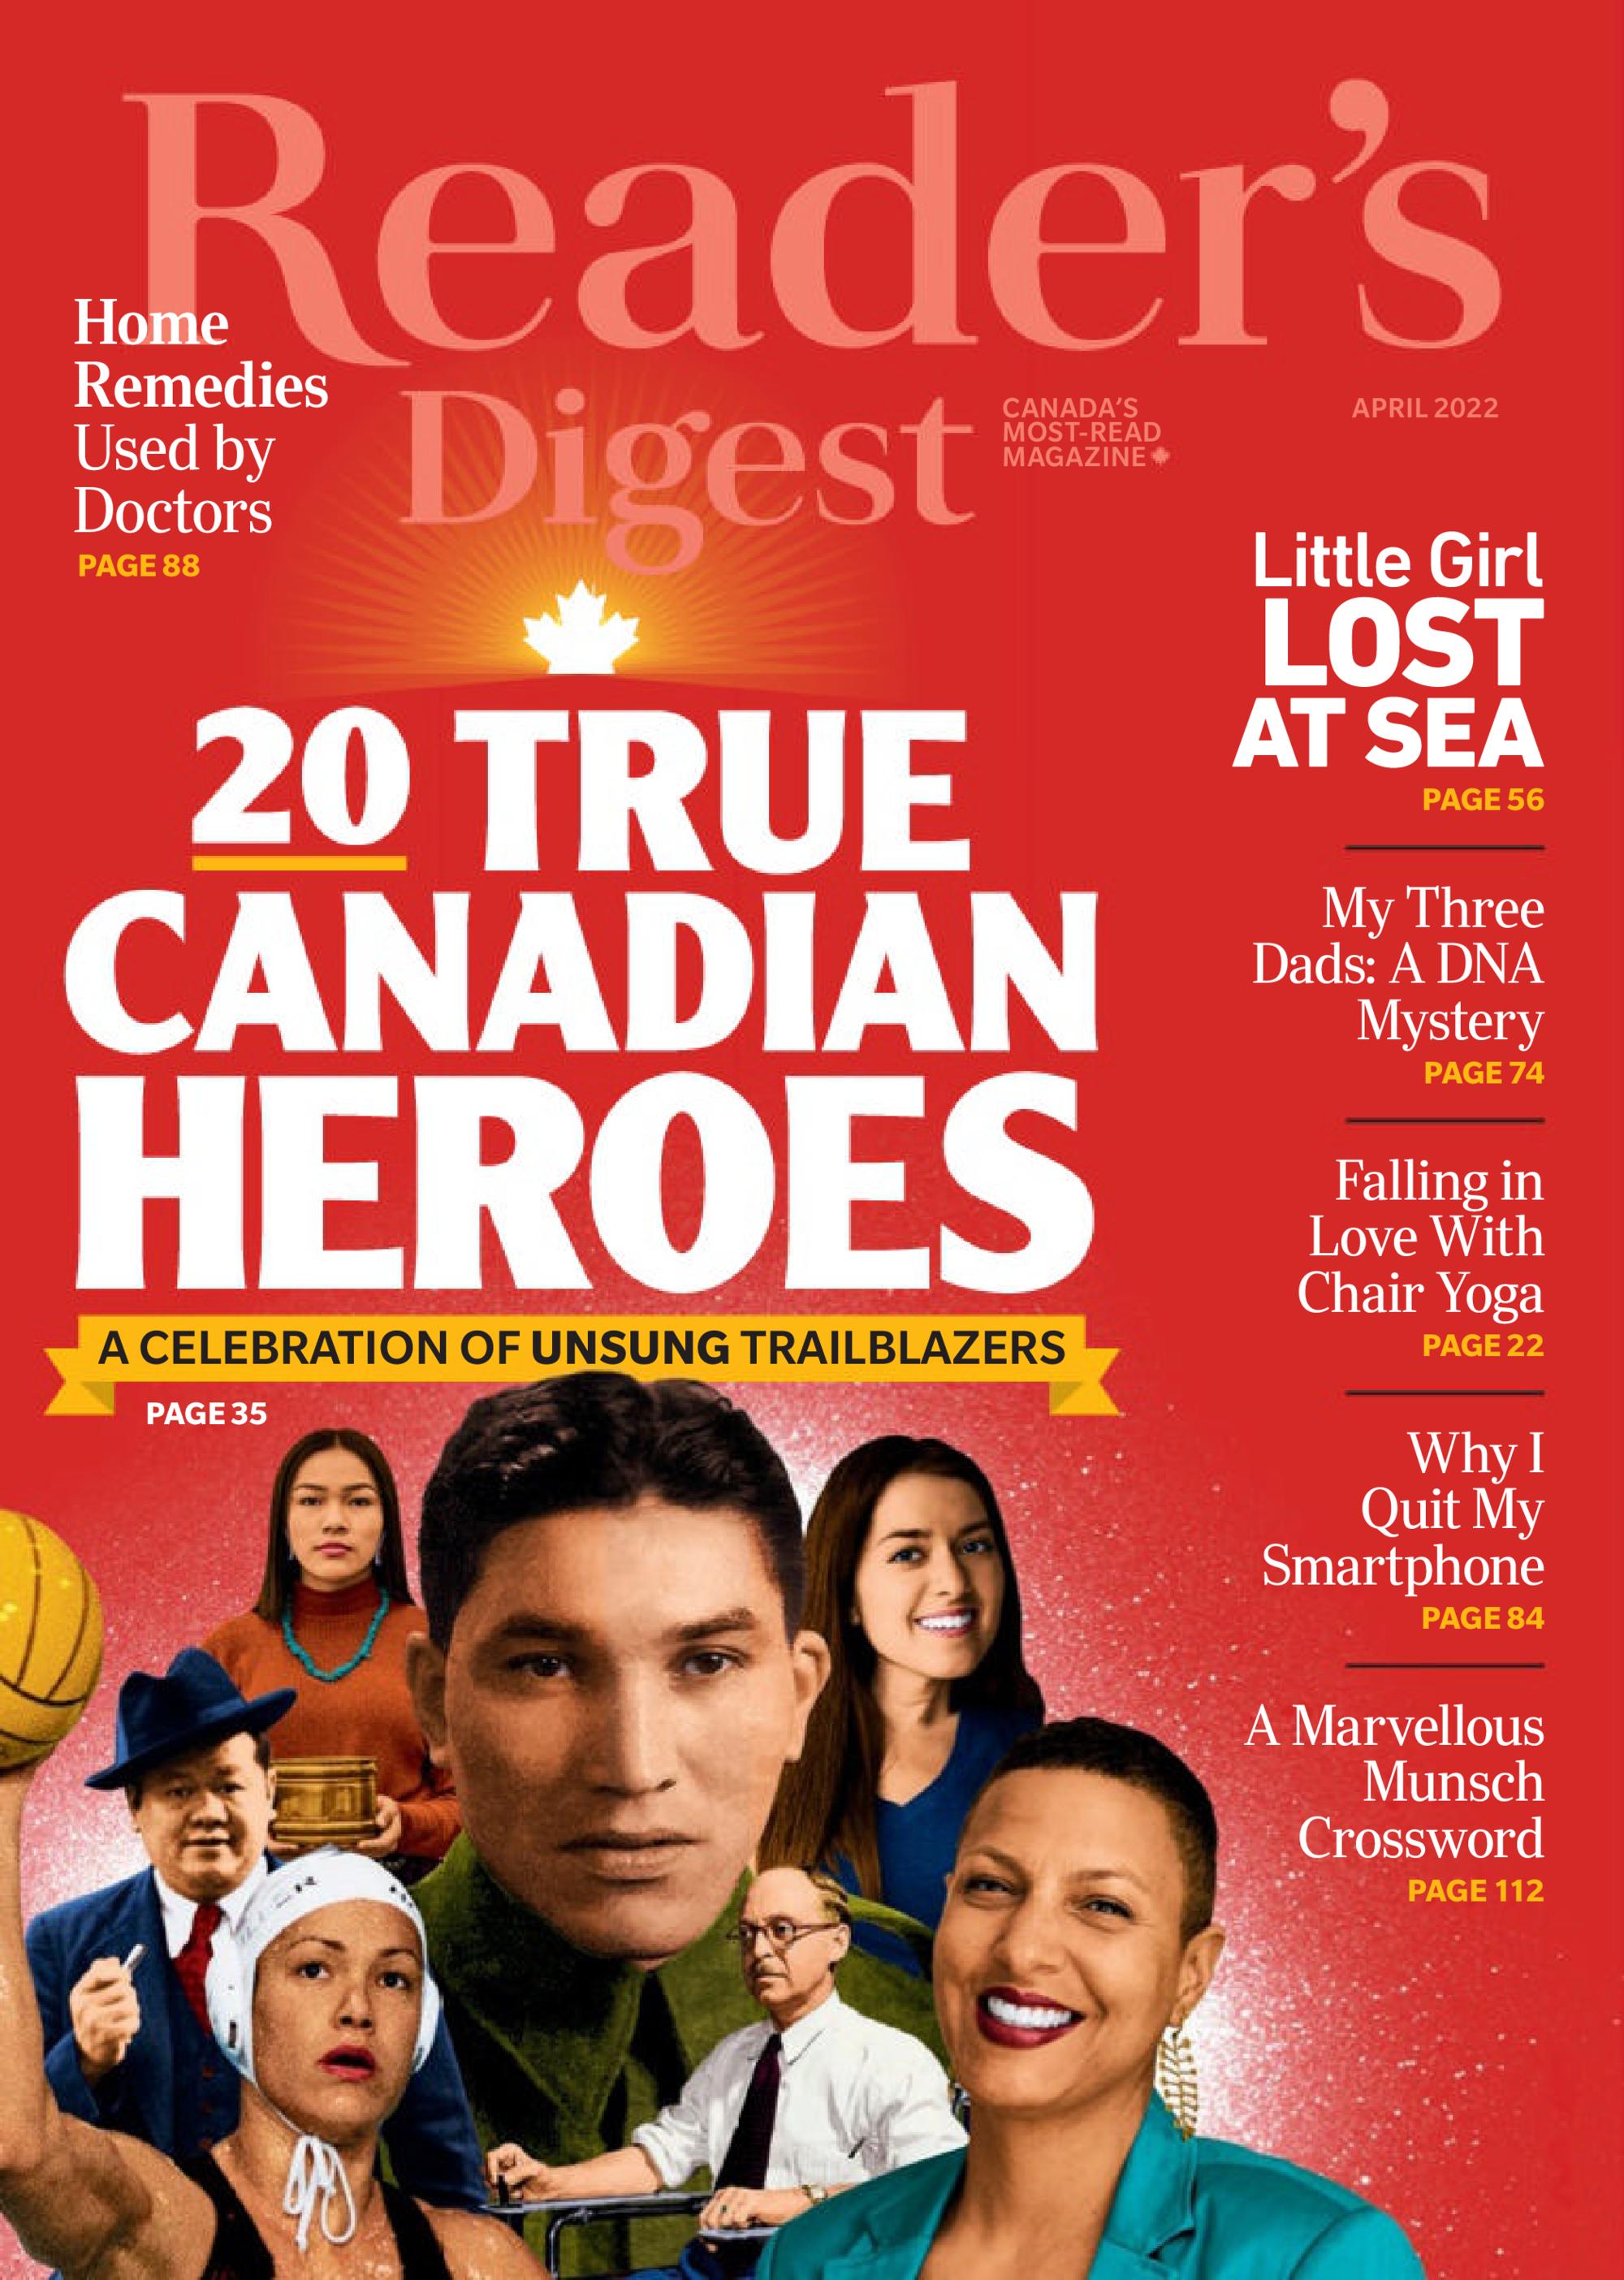 Readers Digest Canada April 2022 Softarchive 